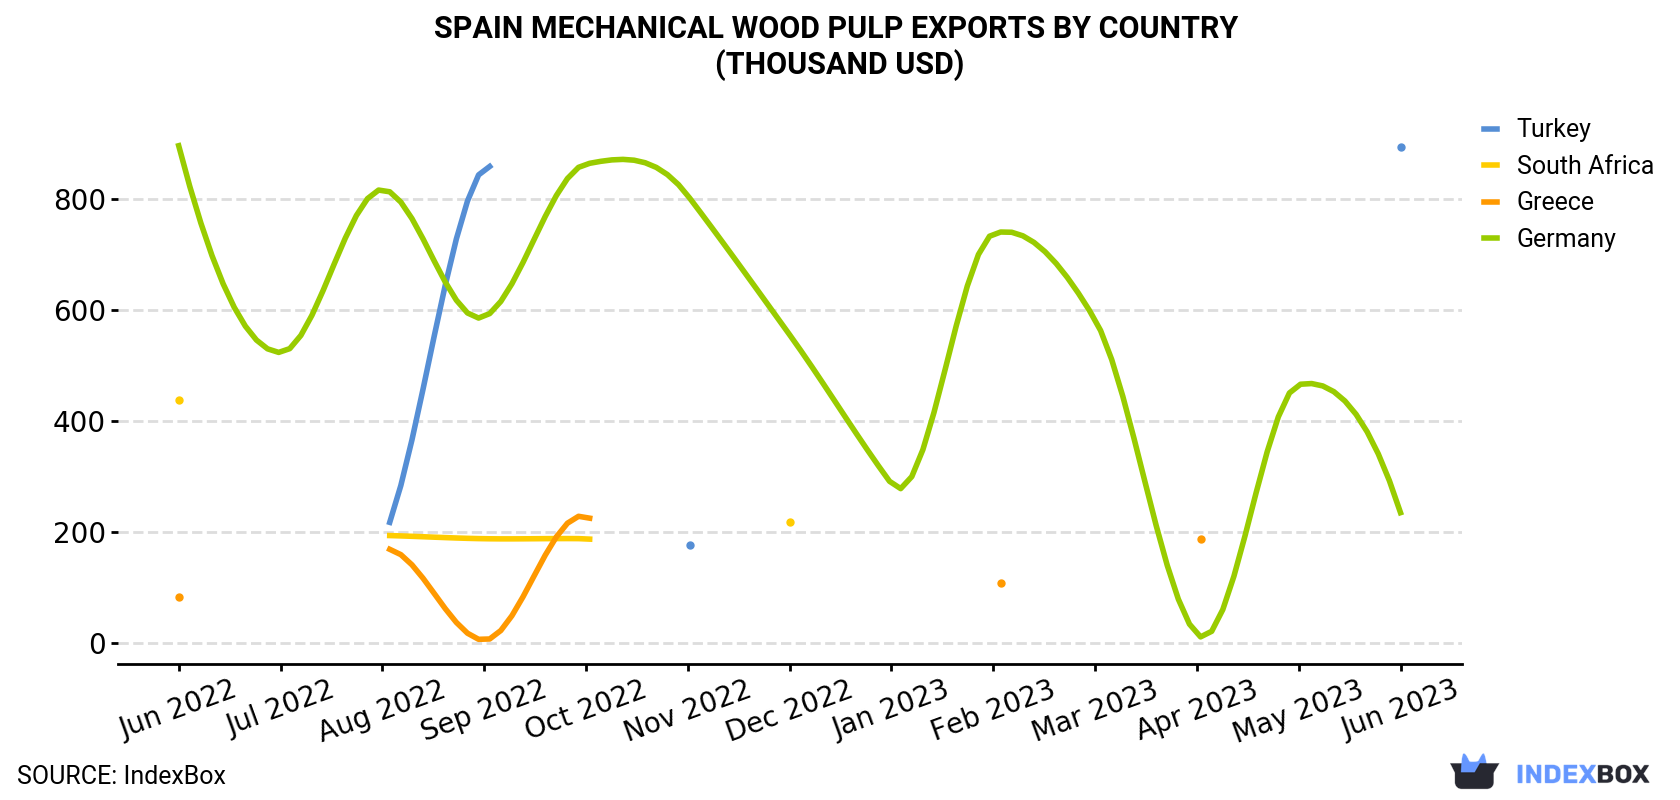 Spain Mechanical Wood Pulp Exports By Country (Thousand USD)